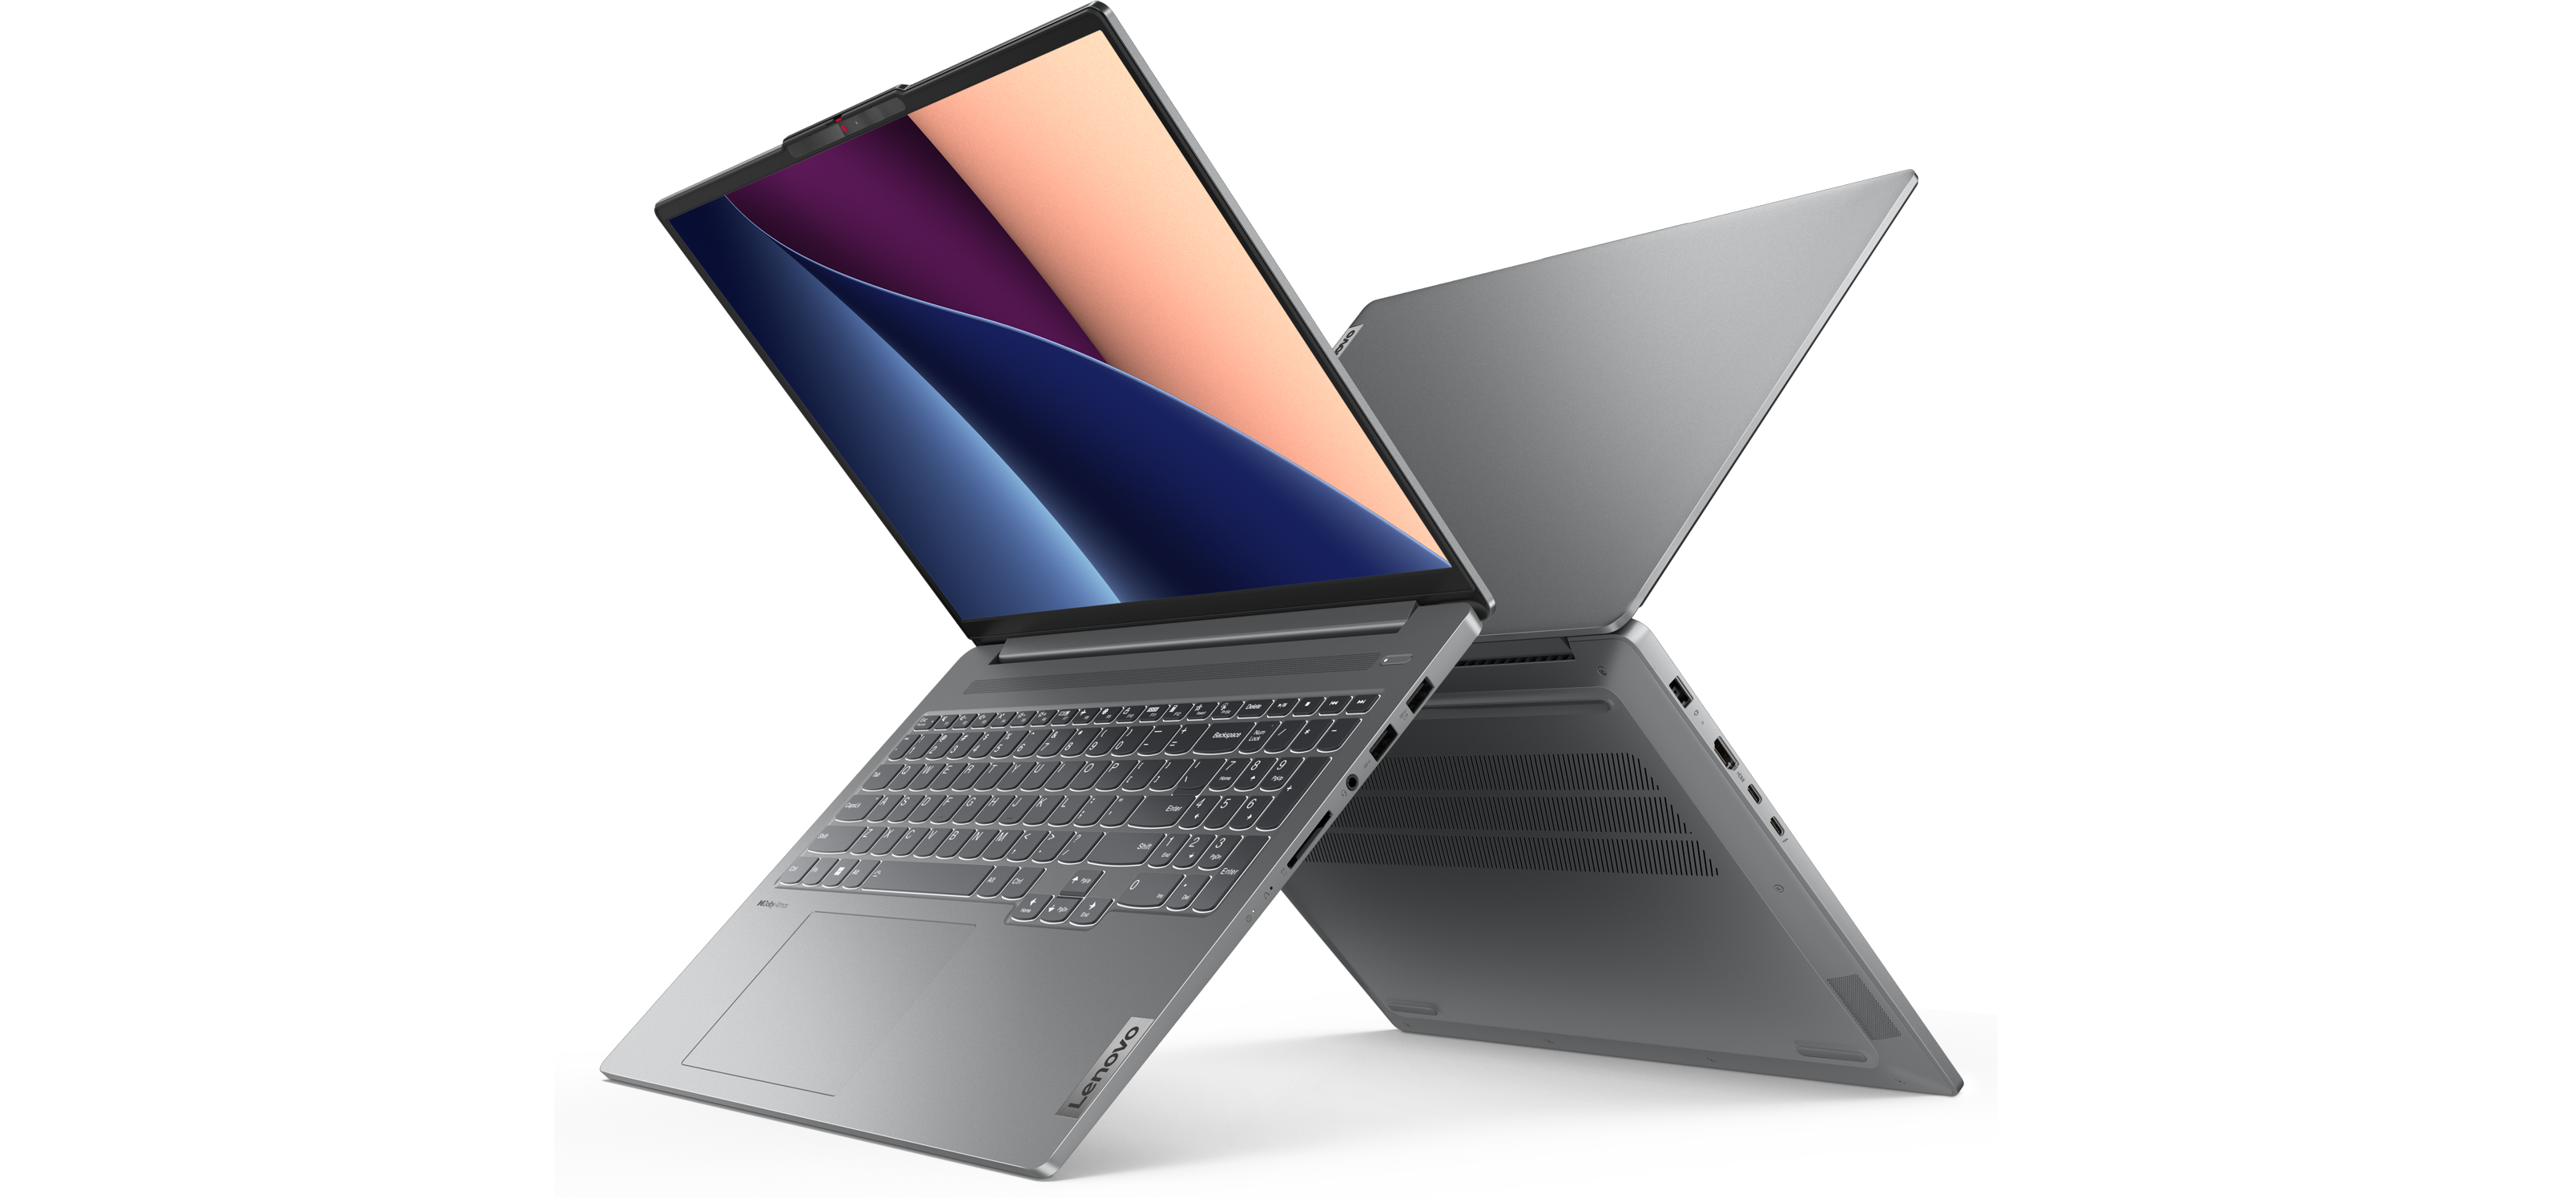 Lenovo unveiled IdeaPad Pro 5 laptops on AMD Ryzen 7000 processors at prices starting from €1099